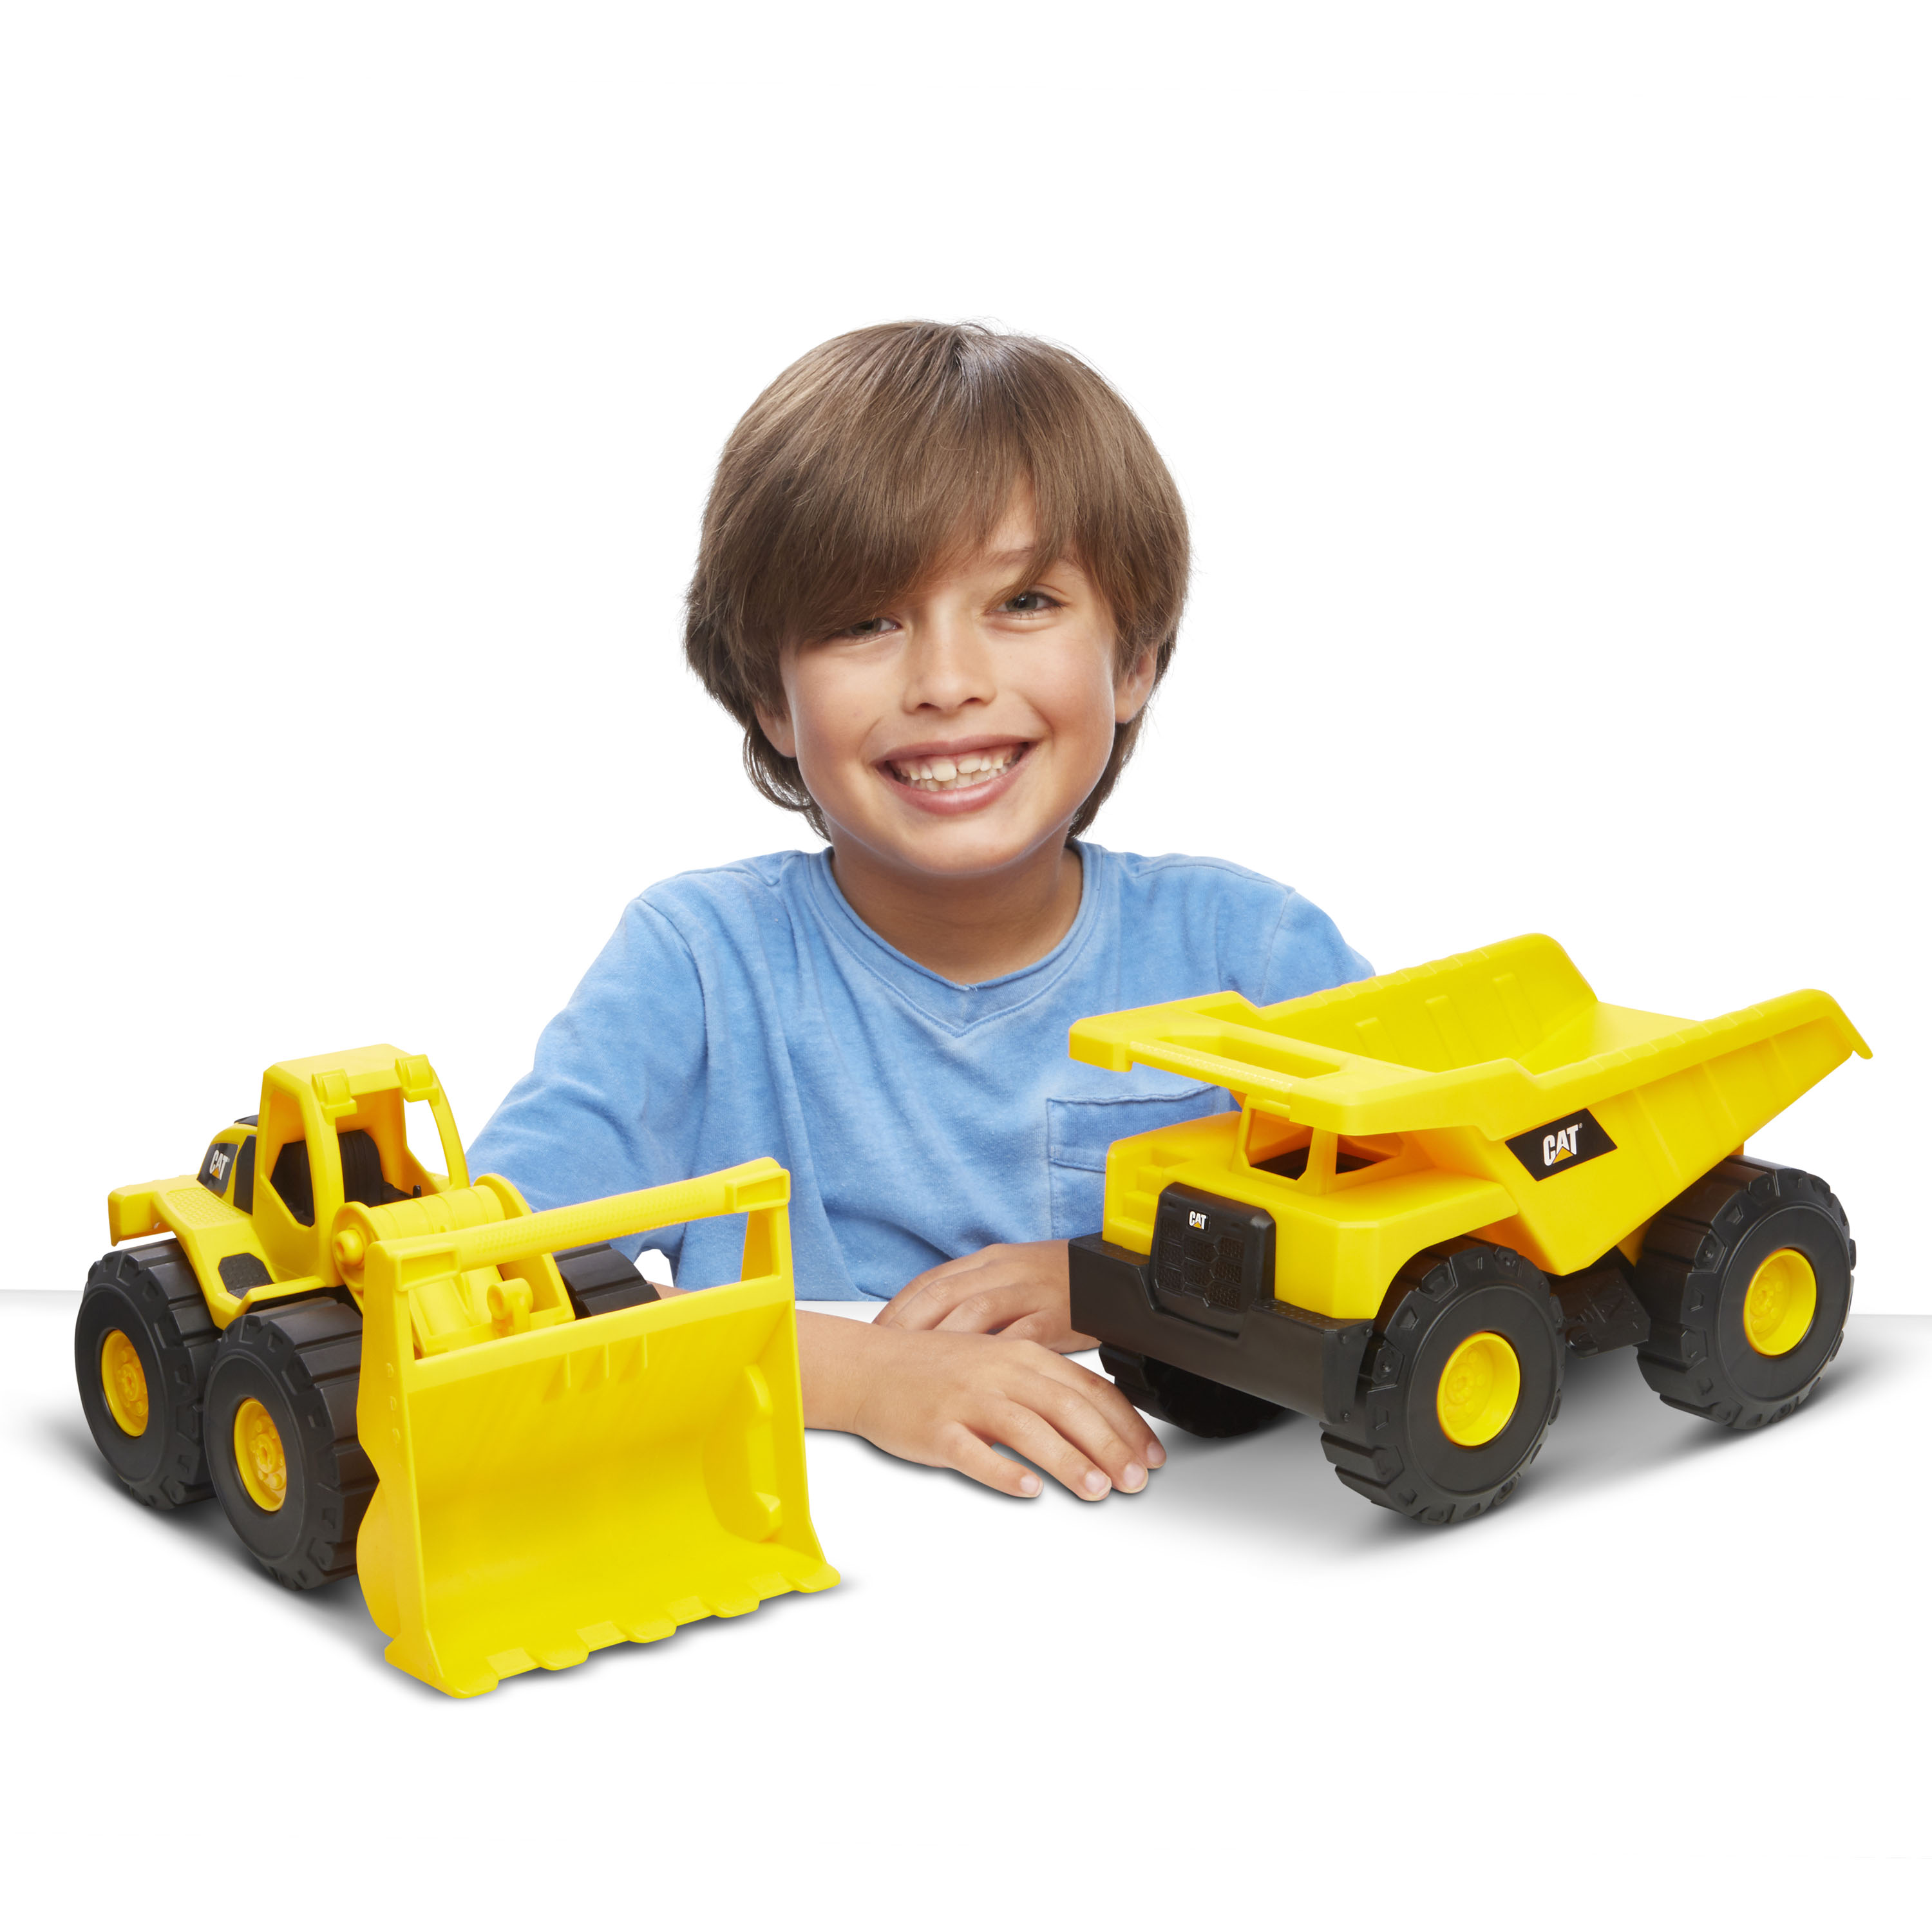 Details about   CatToysOfficial Construction Vehicle 2 Pack Yellow & Games 